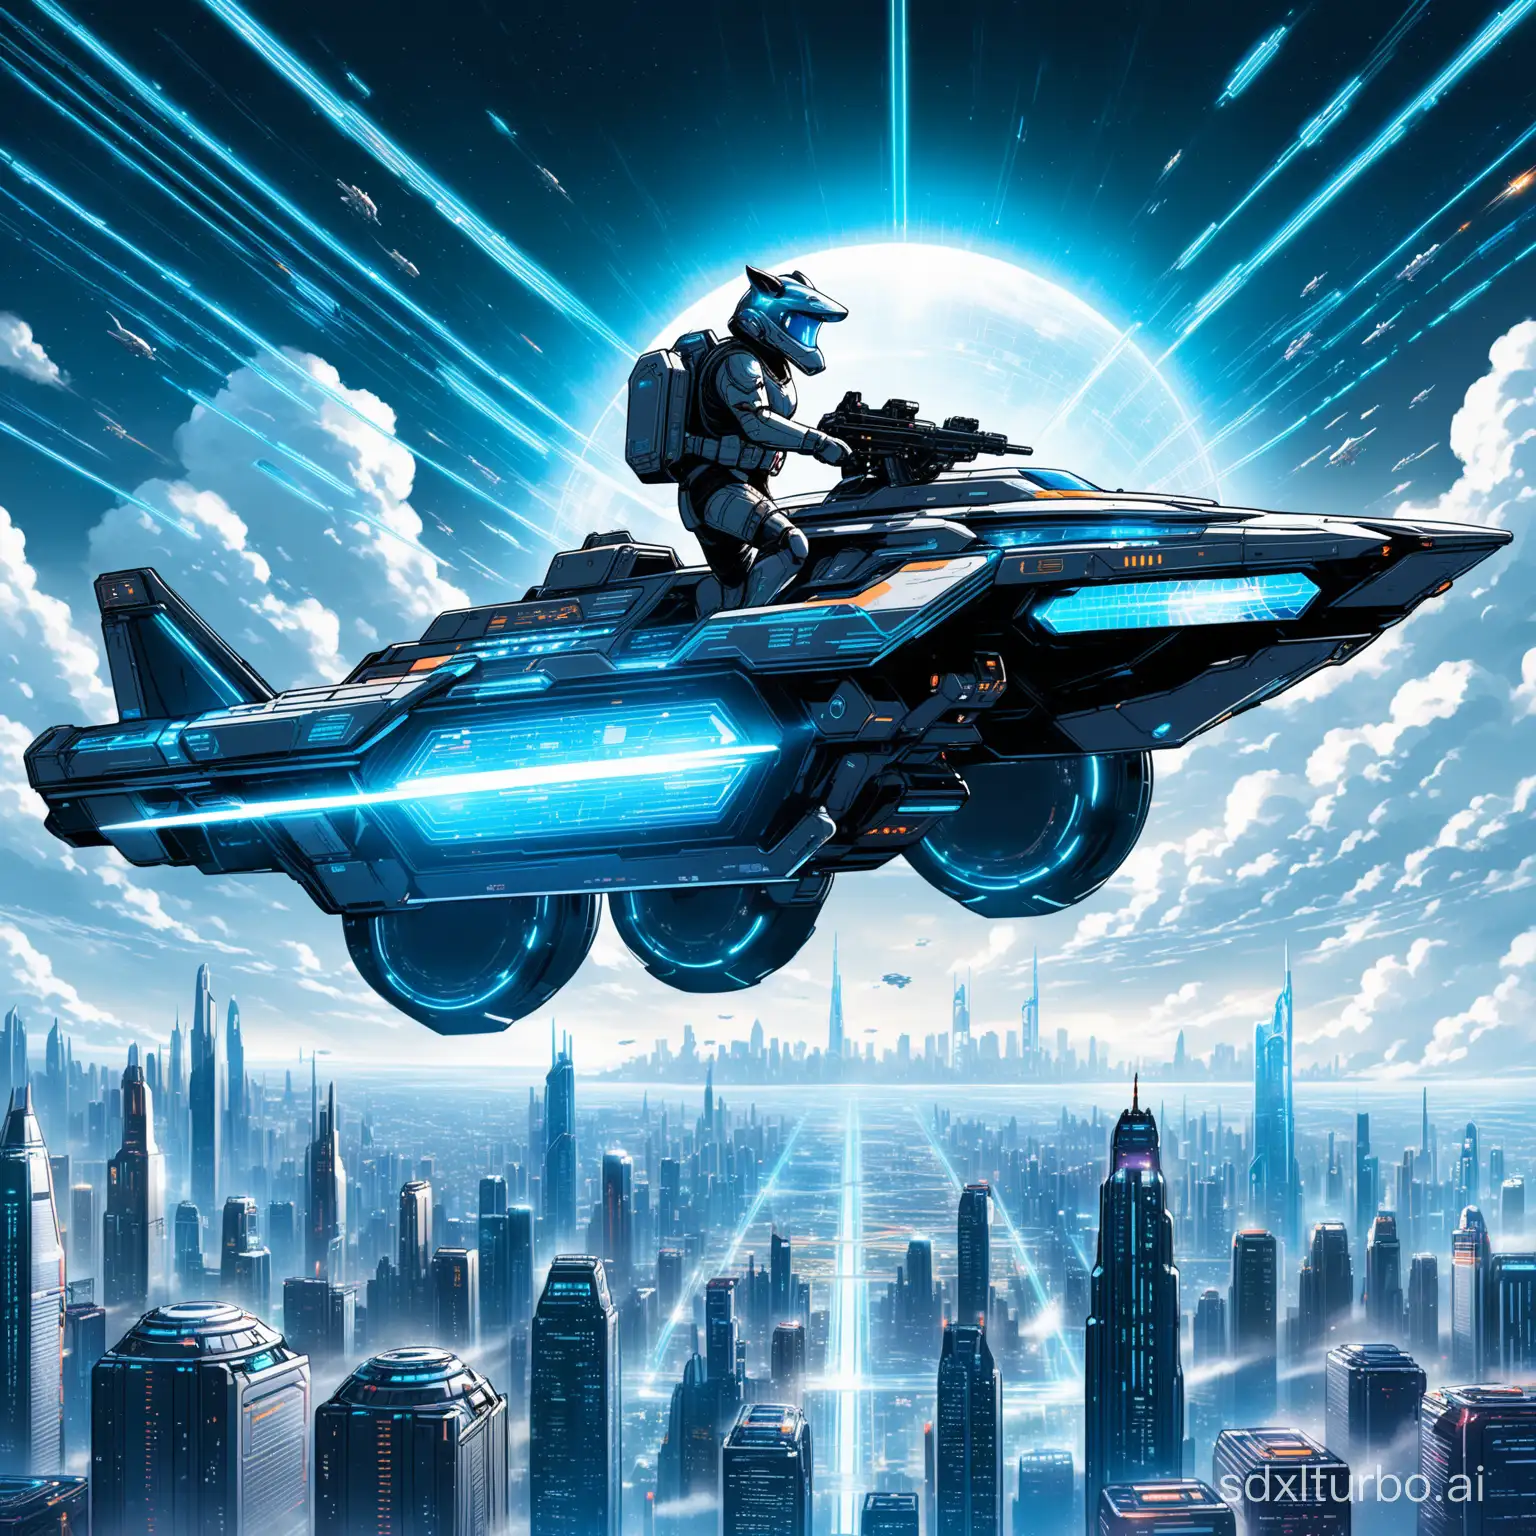 Create a detailed futuristic sci-fi scene featuring a dog in high-tech armor flying above a city skyline. The dog is mounted on a uniquely designed high-speed vehicle, decorated with LED strips and dynamic energy patterns, with a plasma thruster at the rear emitting a dazzling blue flame. The armor is equipped with a mini-reactor and advanced defense systems, and the helmet's HUD displays real-time flight data and environmental scans. The dog holds a futuristic laser rifle, ready for any potential threats. The background showcases a city skyline filled with futuristic technology, where skyscrapers with glass facades reflect the light from the sky, and air traffic is bustling with various vehicles zipping through the clouds, some adorned with ad projections and holographic signage. The overall color scheme is dominated by cool tones, with vibrant colors used in certain details to highlight tech elements and dynamic effects.